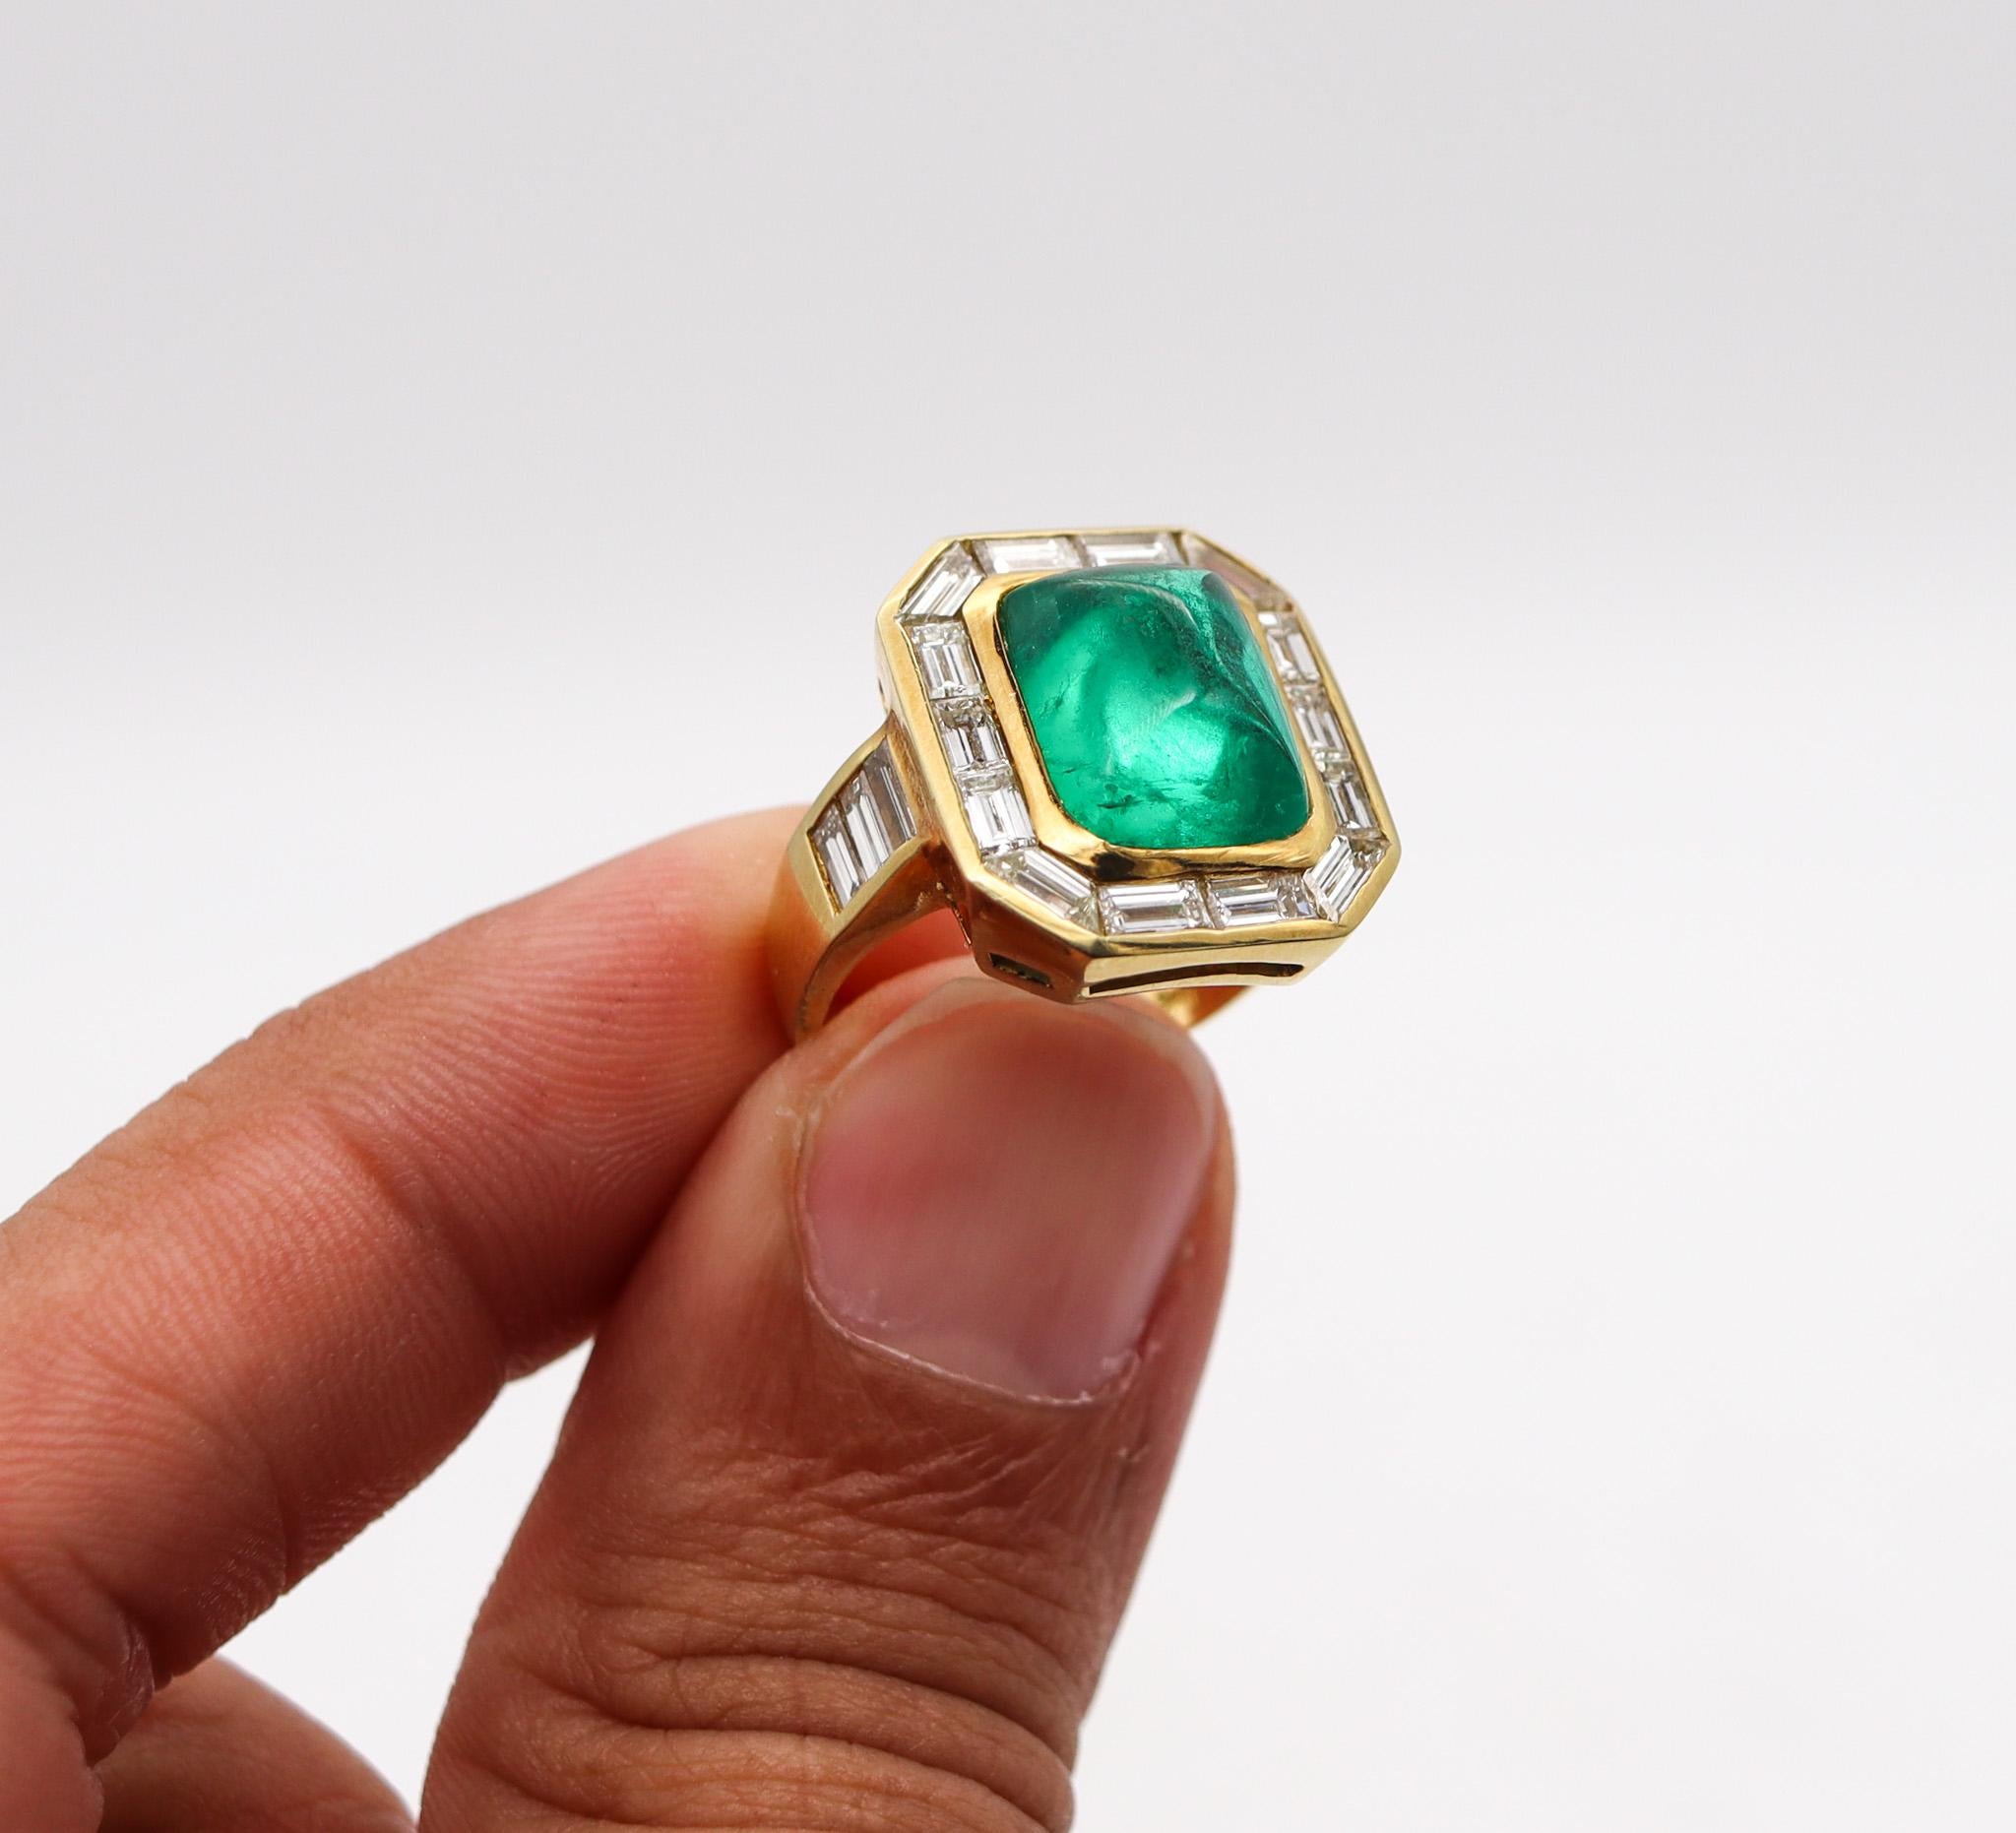 Bvlgari Cocktail Ring In 18Kt Yellow Gold With 9.04 Ctw In Diamonds And Emerald 2